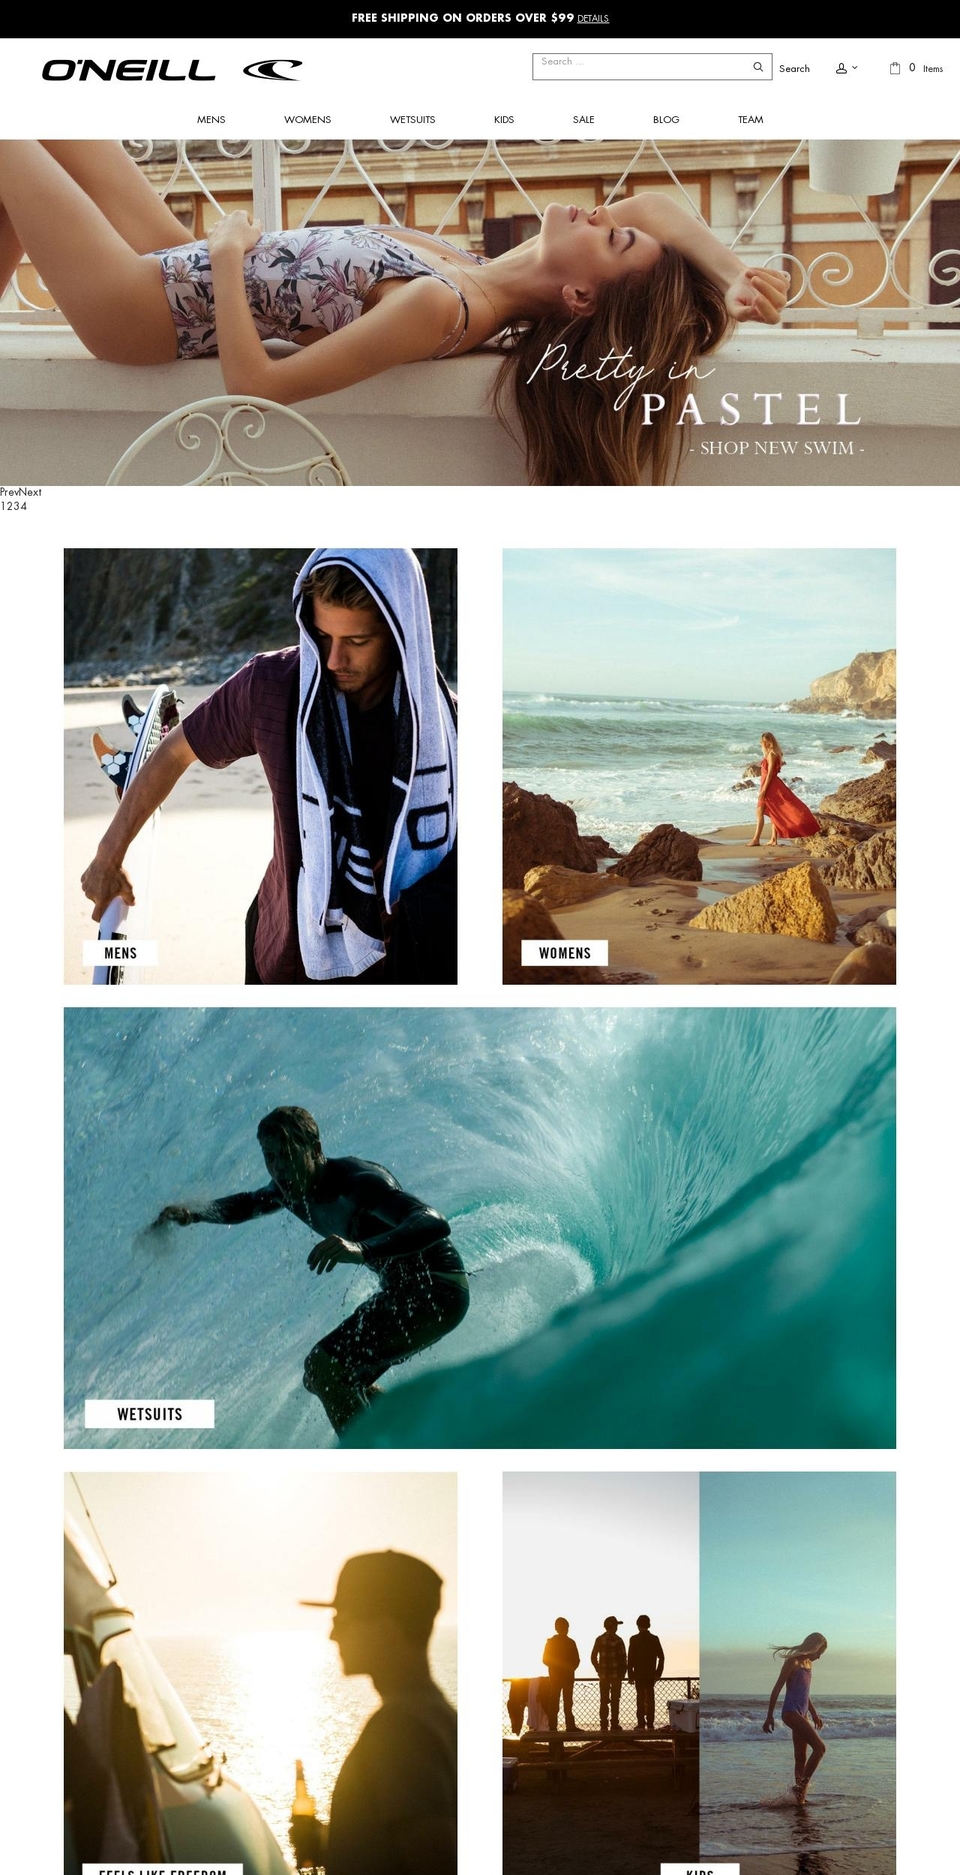 SEED \/\/ Category banners Shopify theme site example oneill.clothing